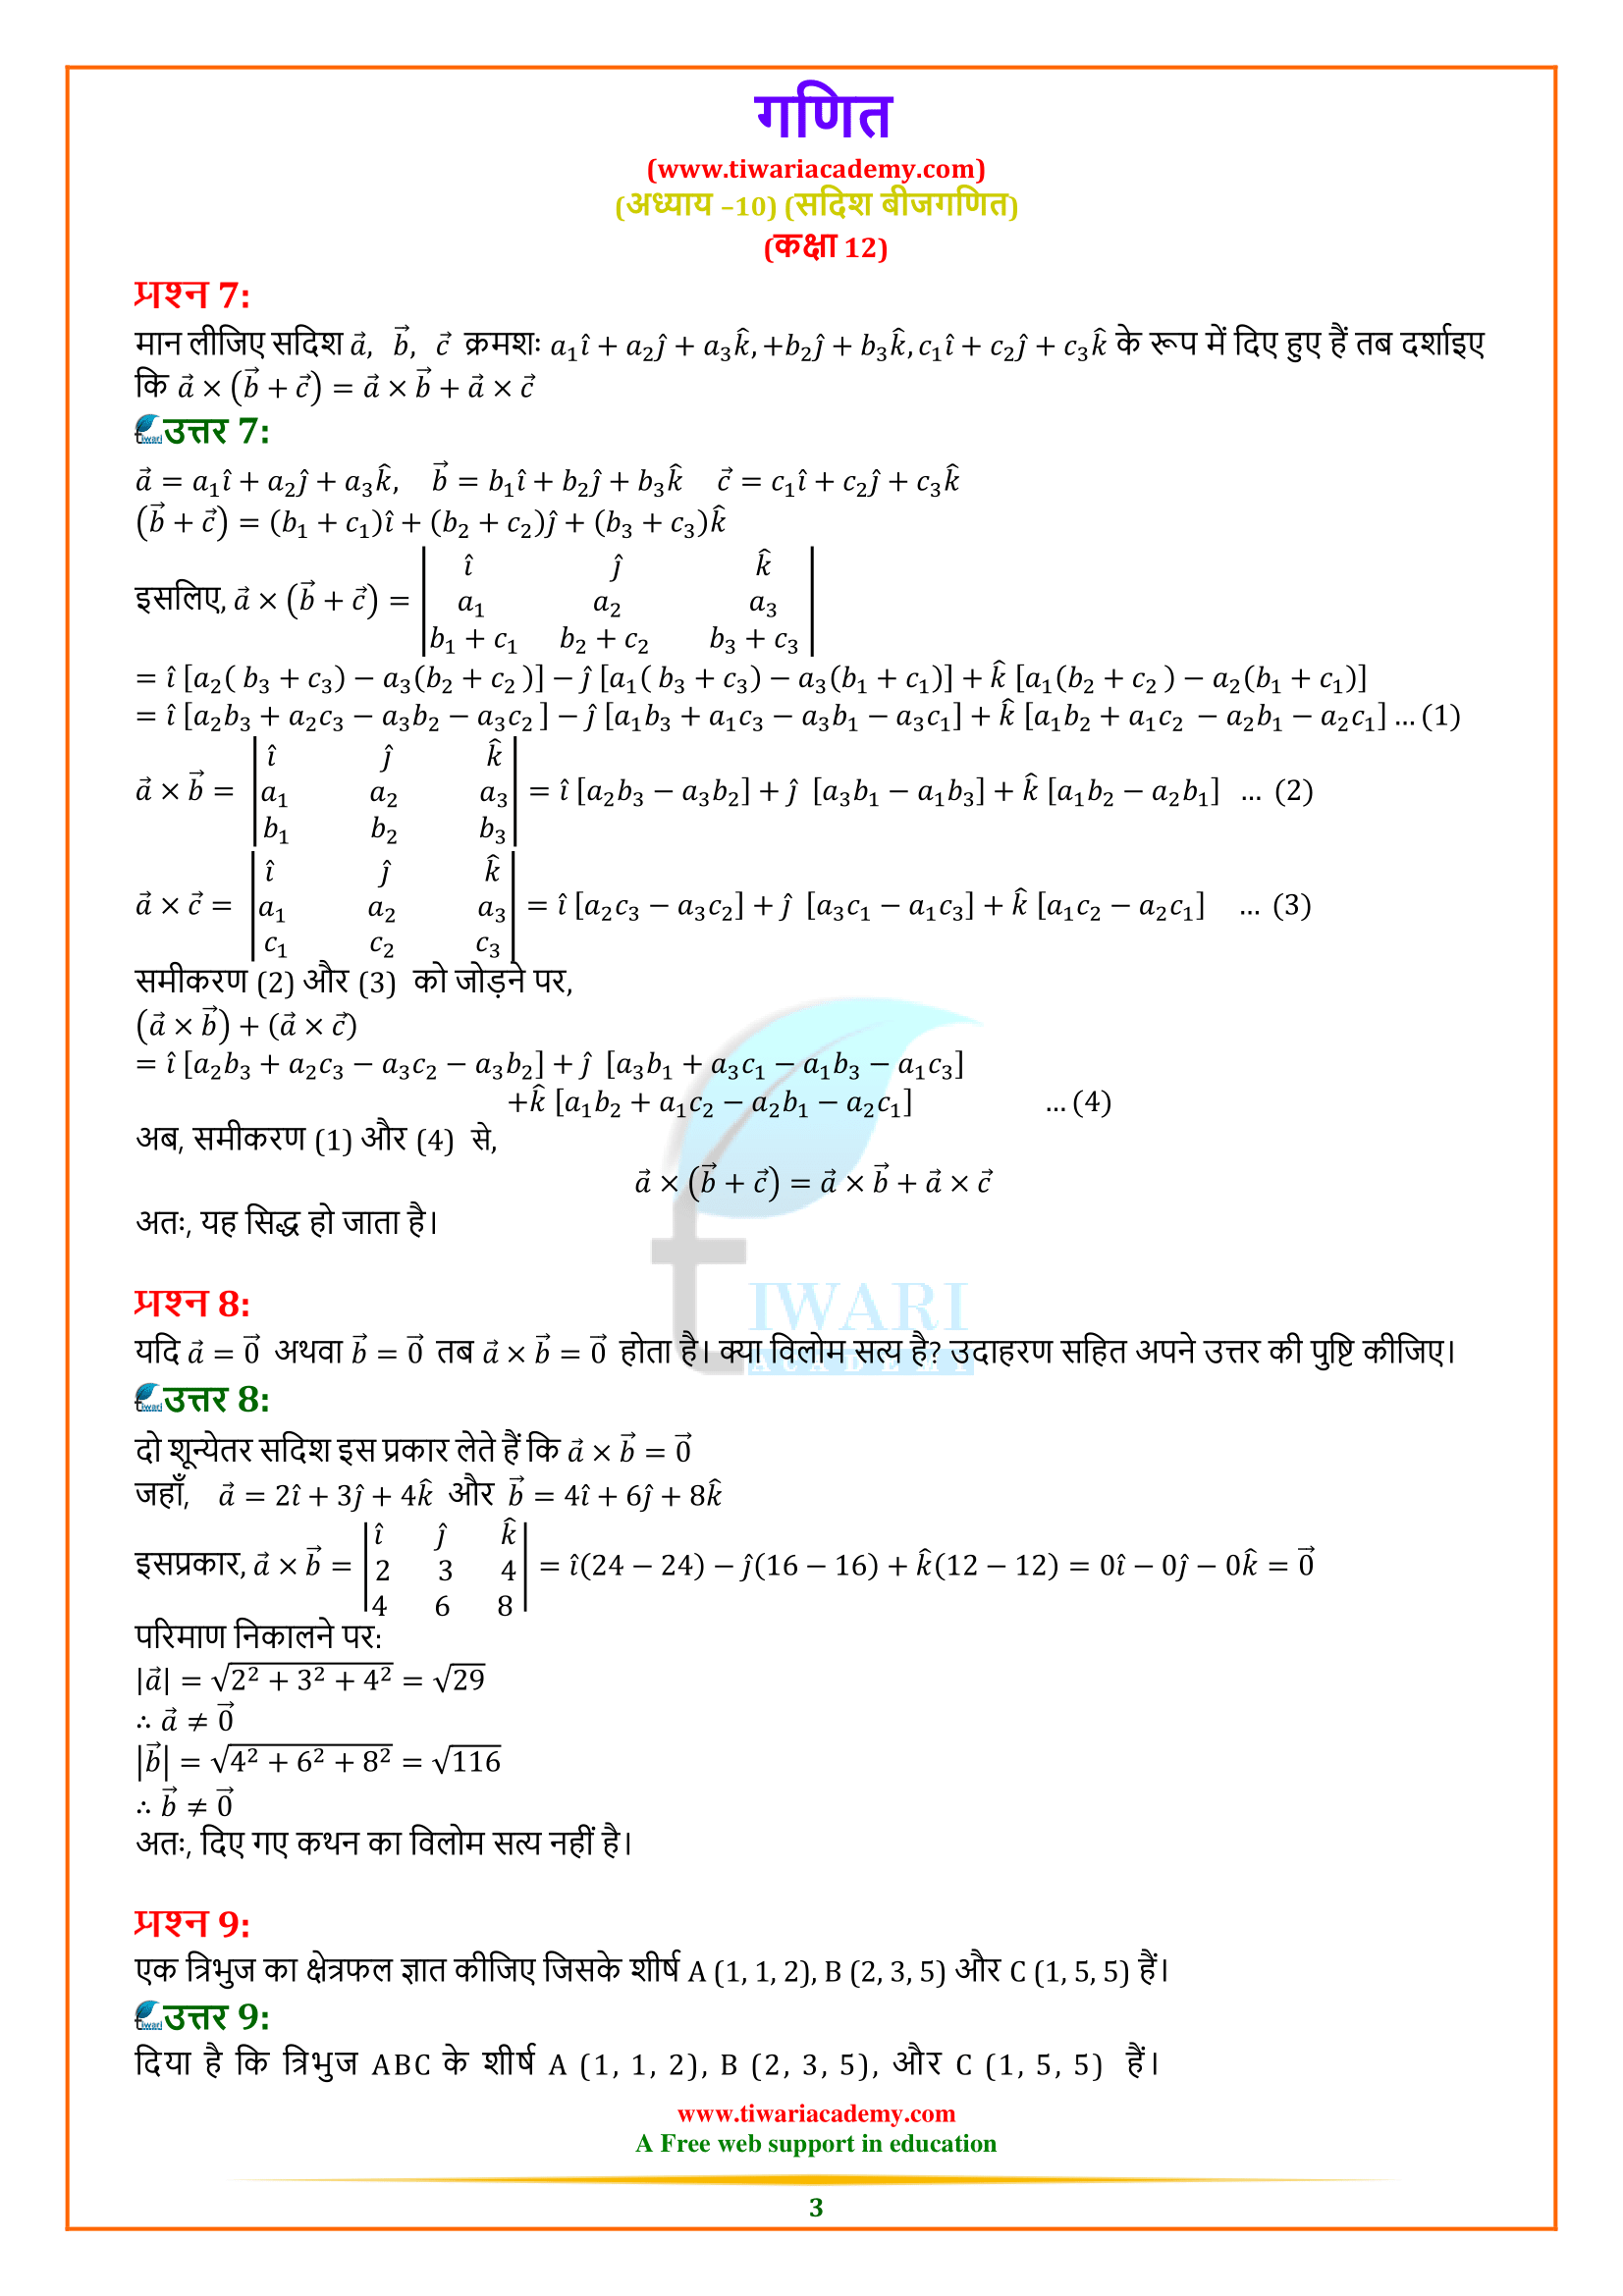 NCERT Solutions for Class 12 Maths Exercise 10.4 in Hindi Medium for intermediate students